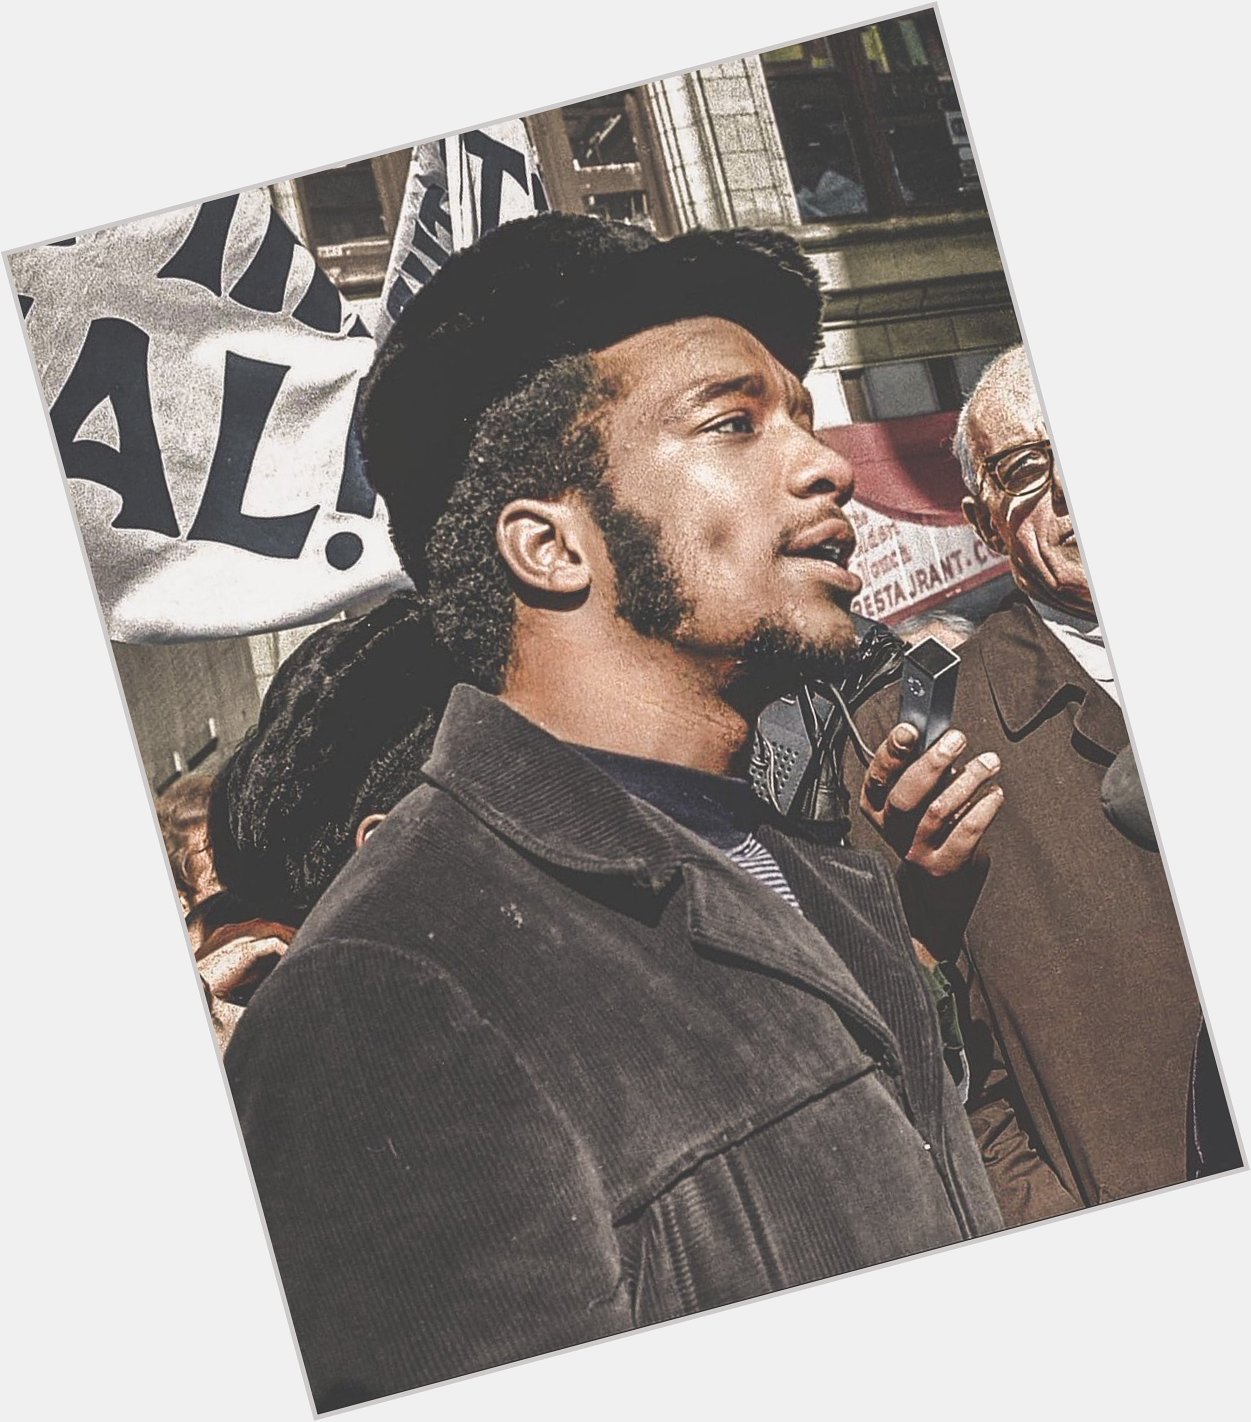 Fred Hampton would ve been 74 today.

Happy birthday. Rest in power  